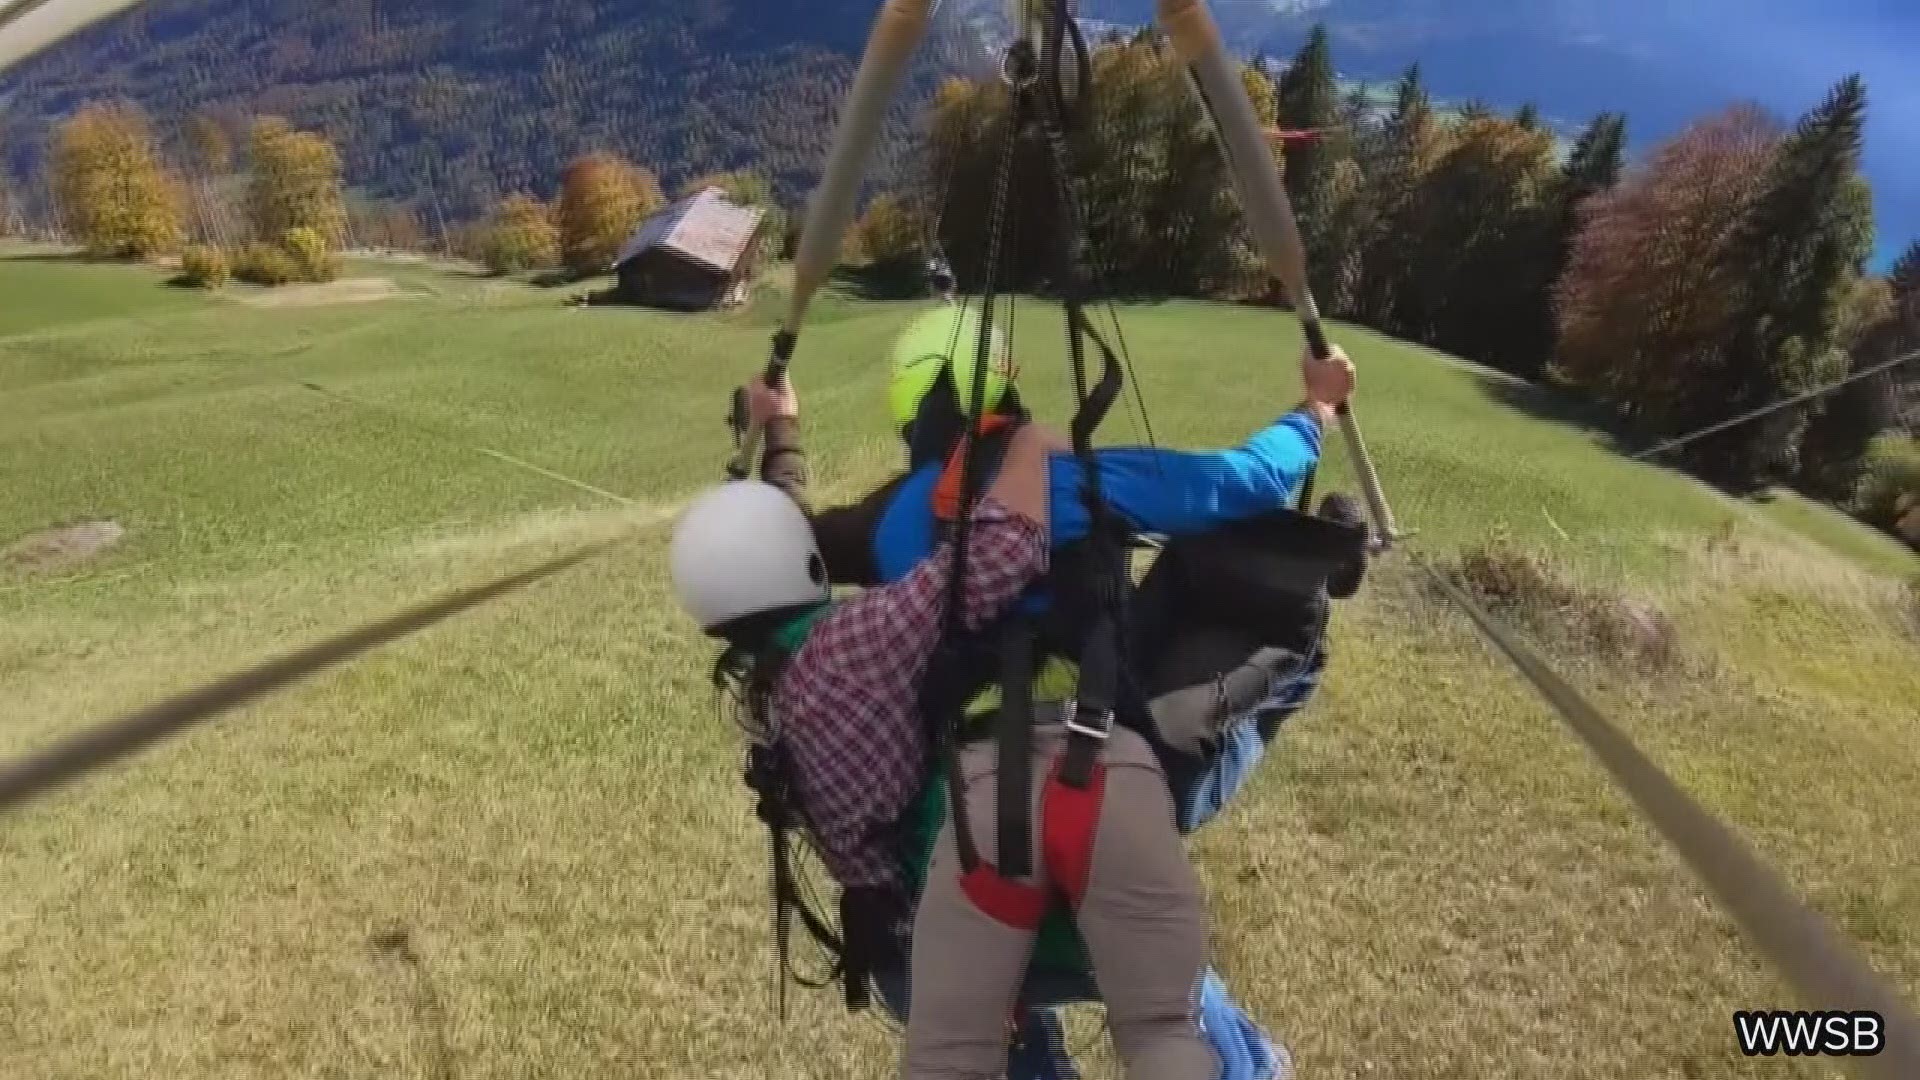 Last November, North Port man Chris Gursky dangled from a hang glider for more than two minutes after it launched off a 4,000-foot mountain ledge.

It was his first time hang gliding, but the safety harness was reportedly not attached properly.